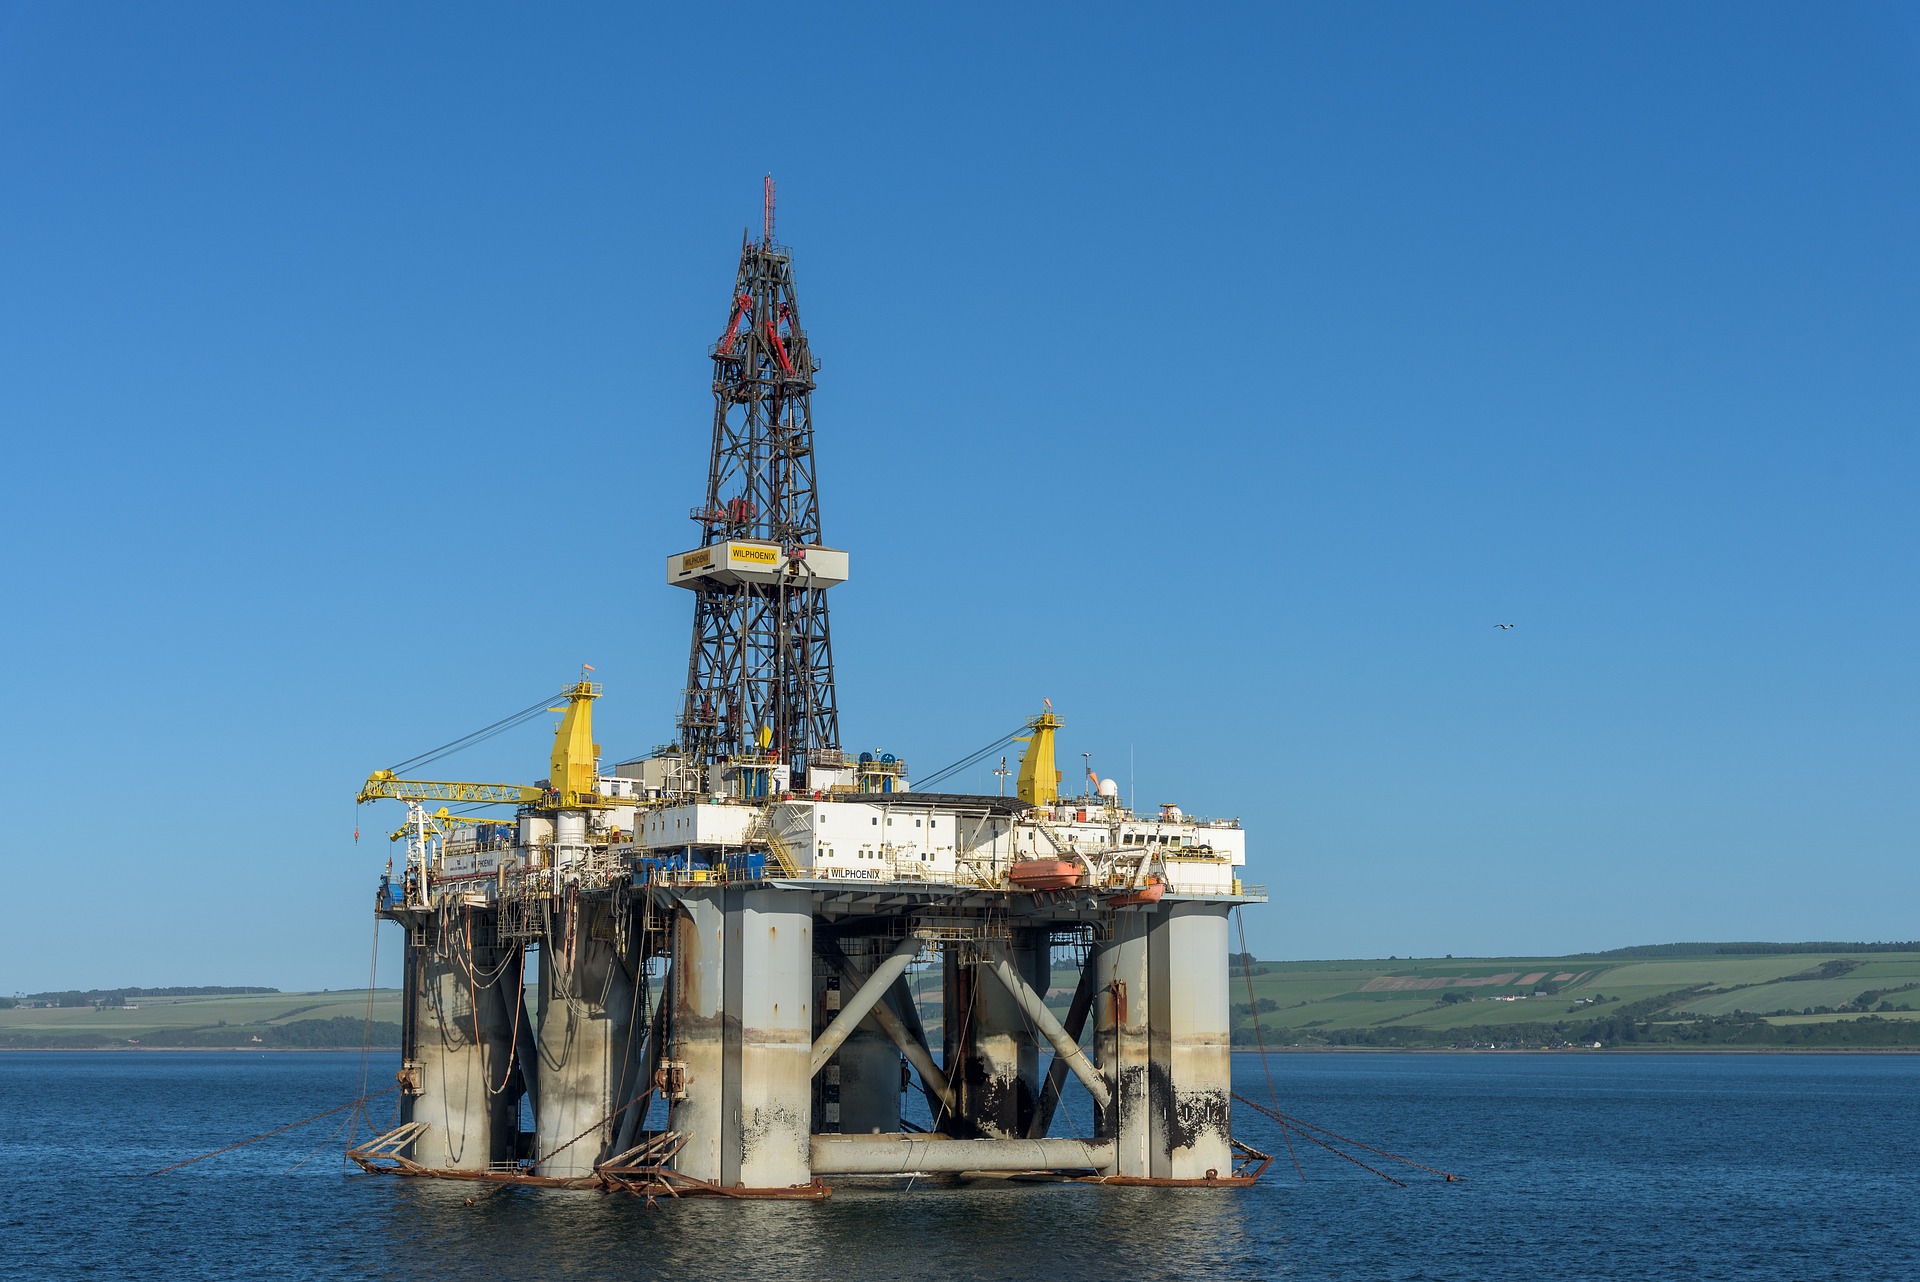 An oil rig in Scotland, courtesy of MustangJoe from Pixabay.